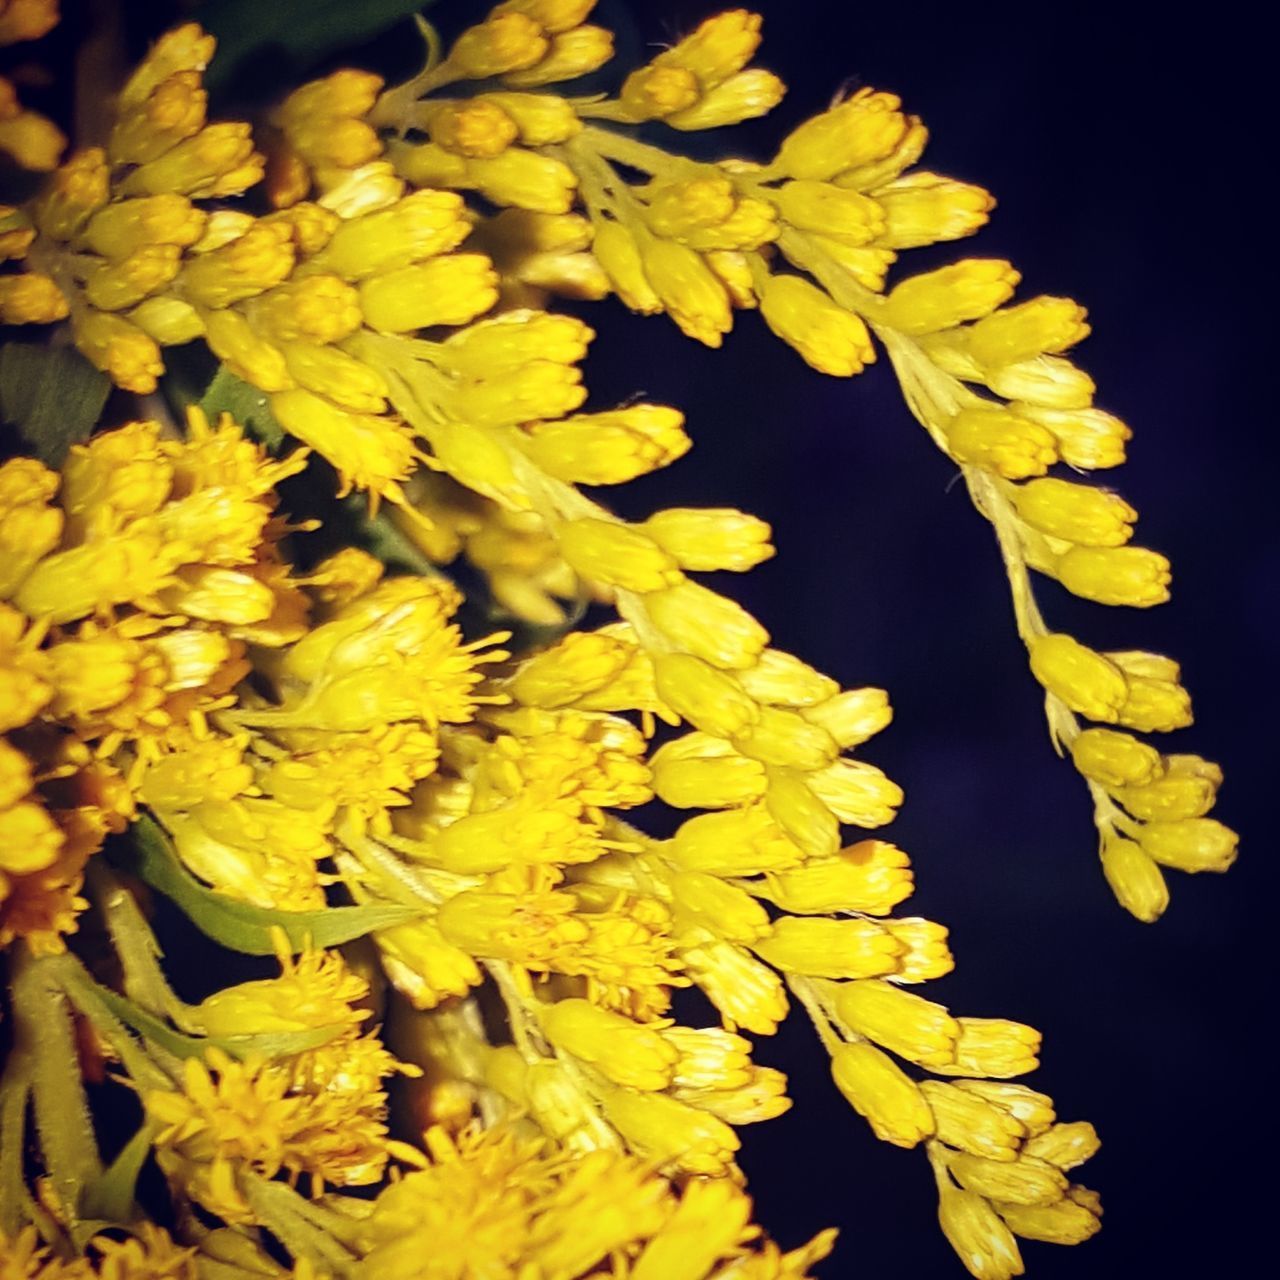 CLOSE-UP OF YELLOW FLOWERING PLANTS